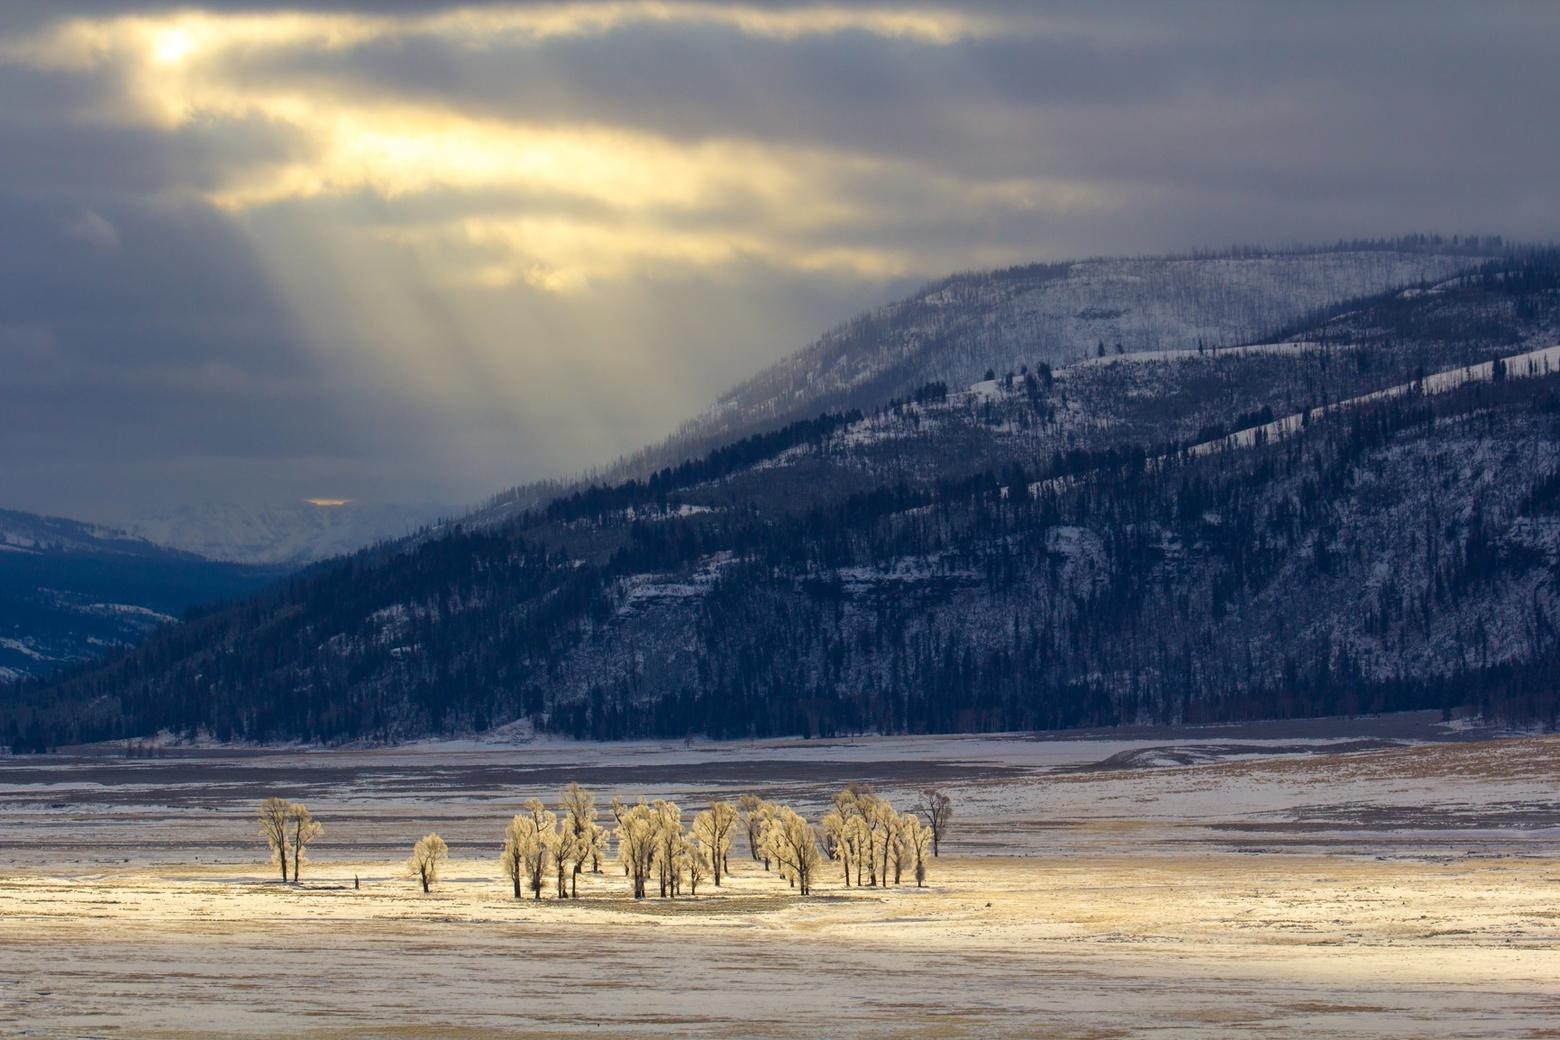 It's easy to see why nature can be therapeutic: the Lamar Valley in Yellowstone National Park.